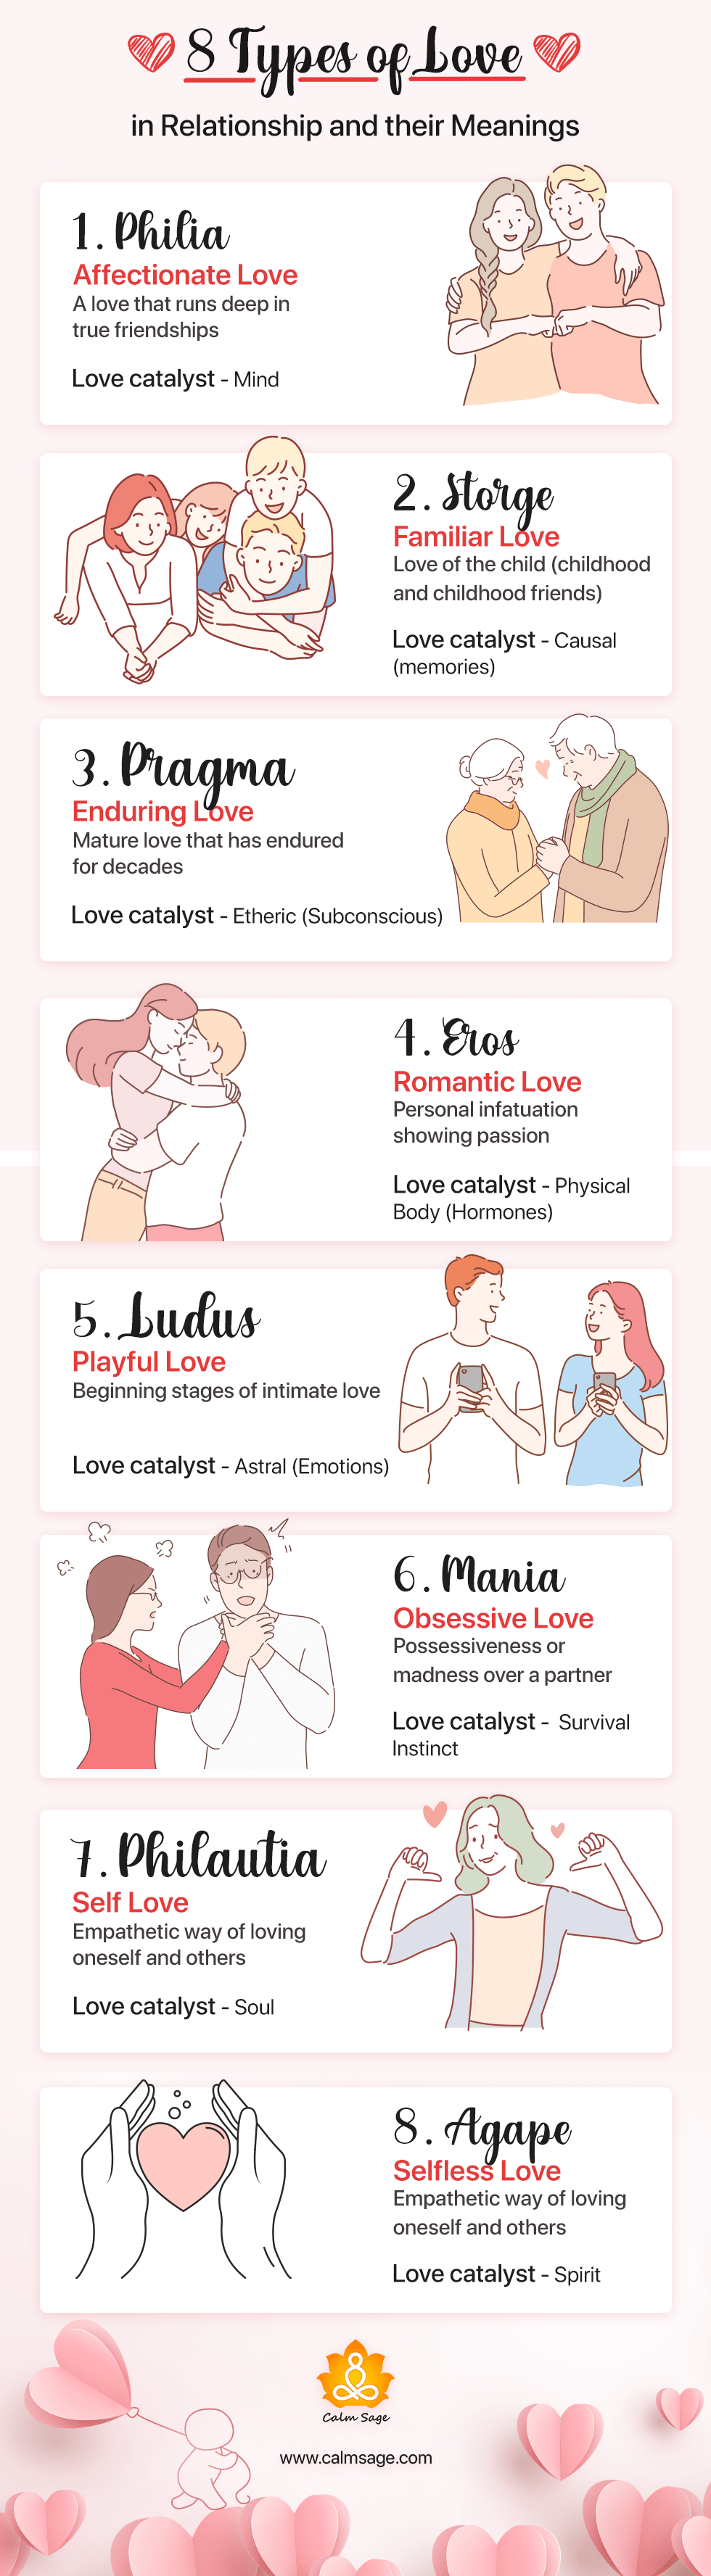 What Is Love? Meaning, History, Signs and Types